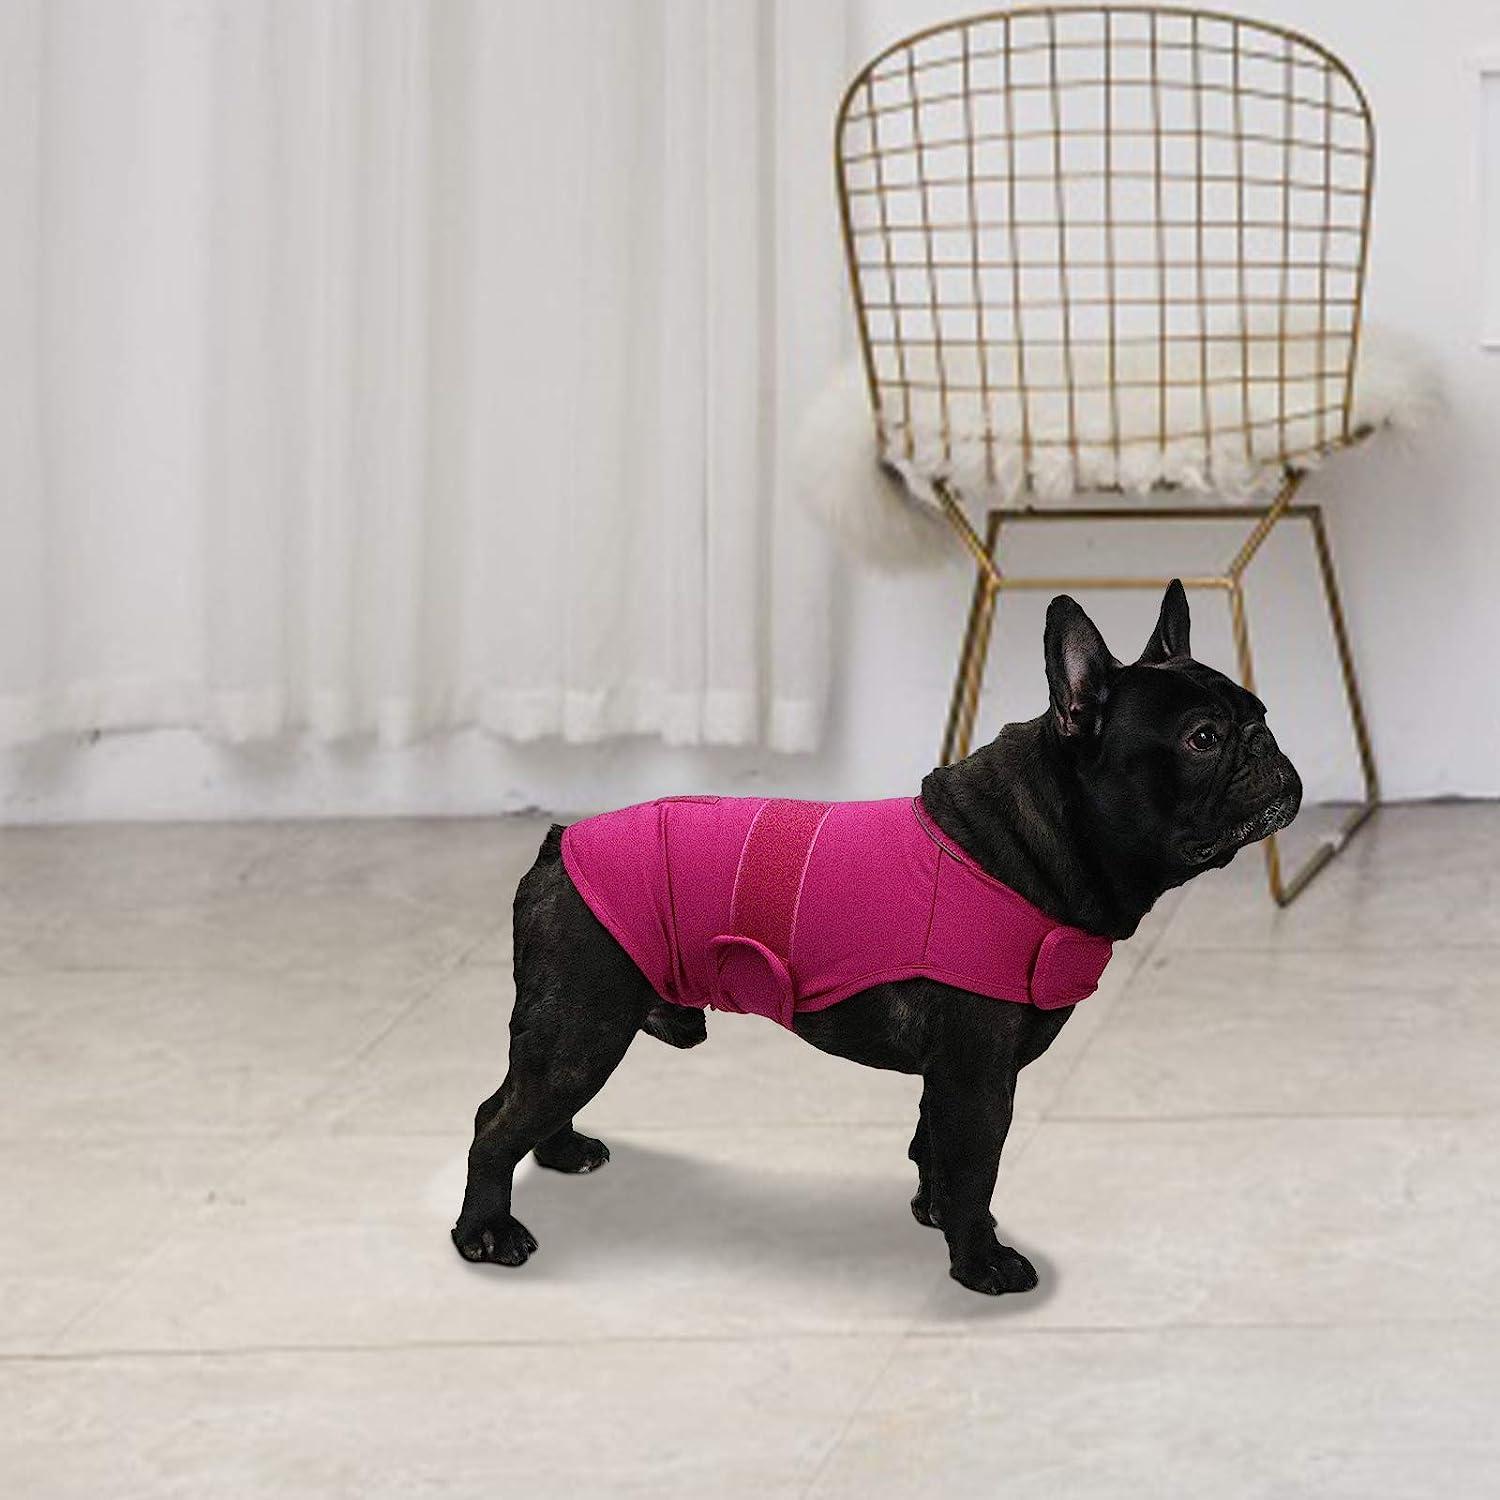 The Dog Face Puffer Jacket  Comforting Outerwear for Dachshund